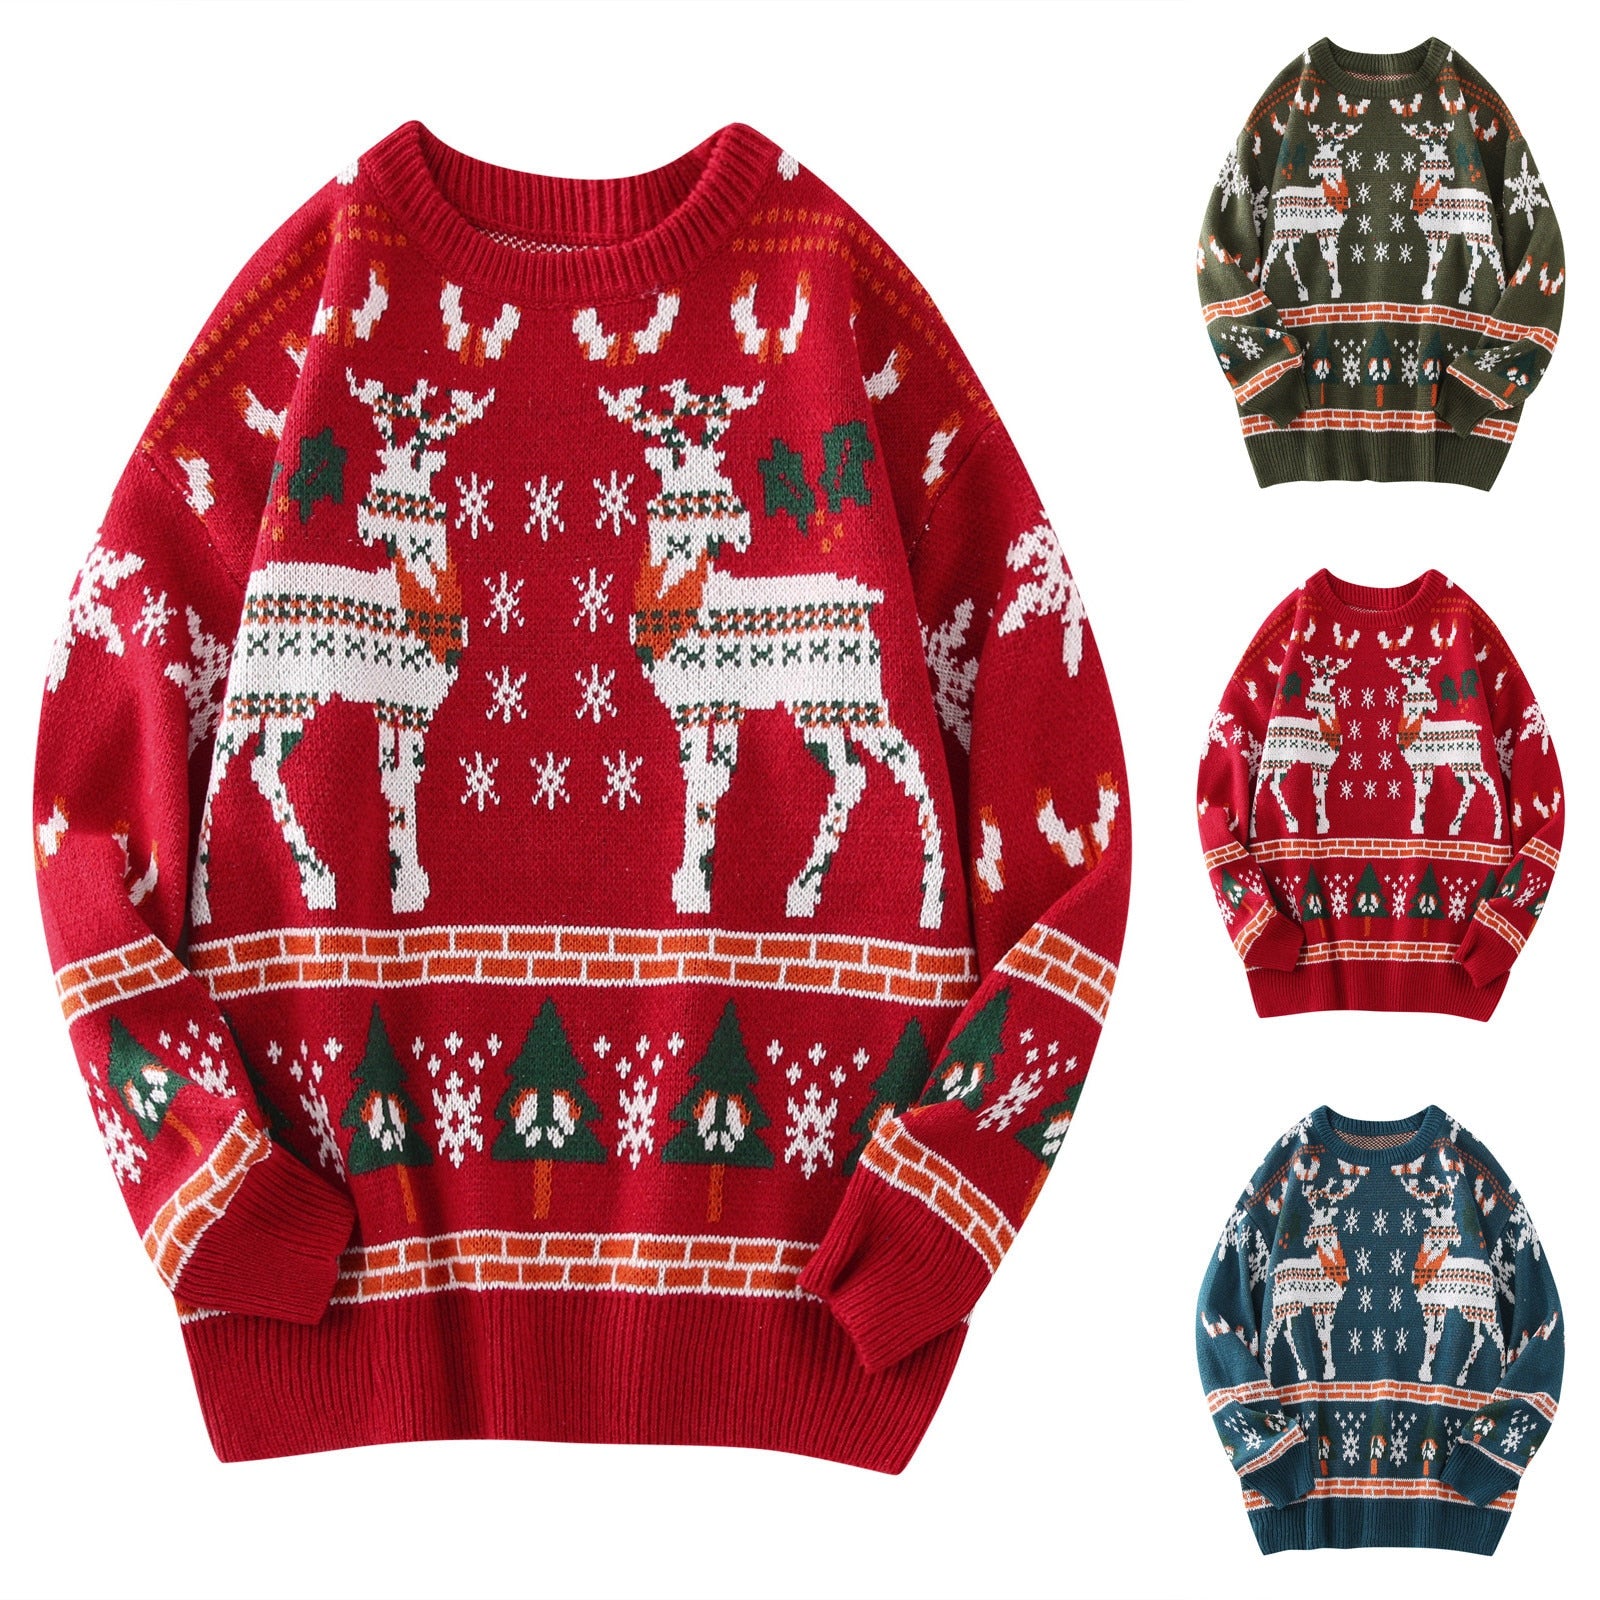 Men Casual Christmas Deer Print Sweater Long Sleeve Round Neck Sweater Blouse Winter Clothes Sweater Vinage Oversize Sweaters